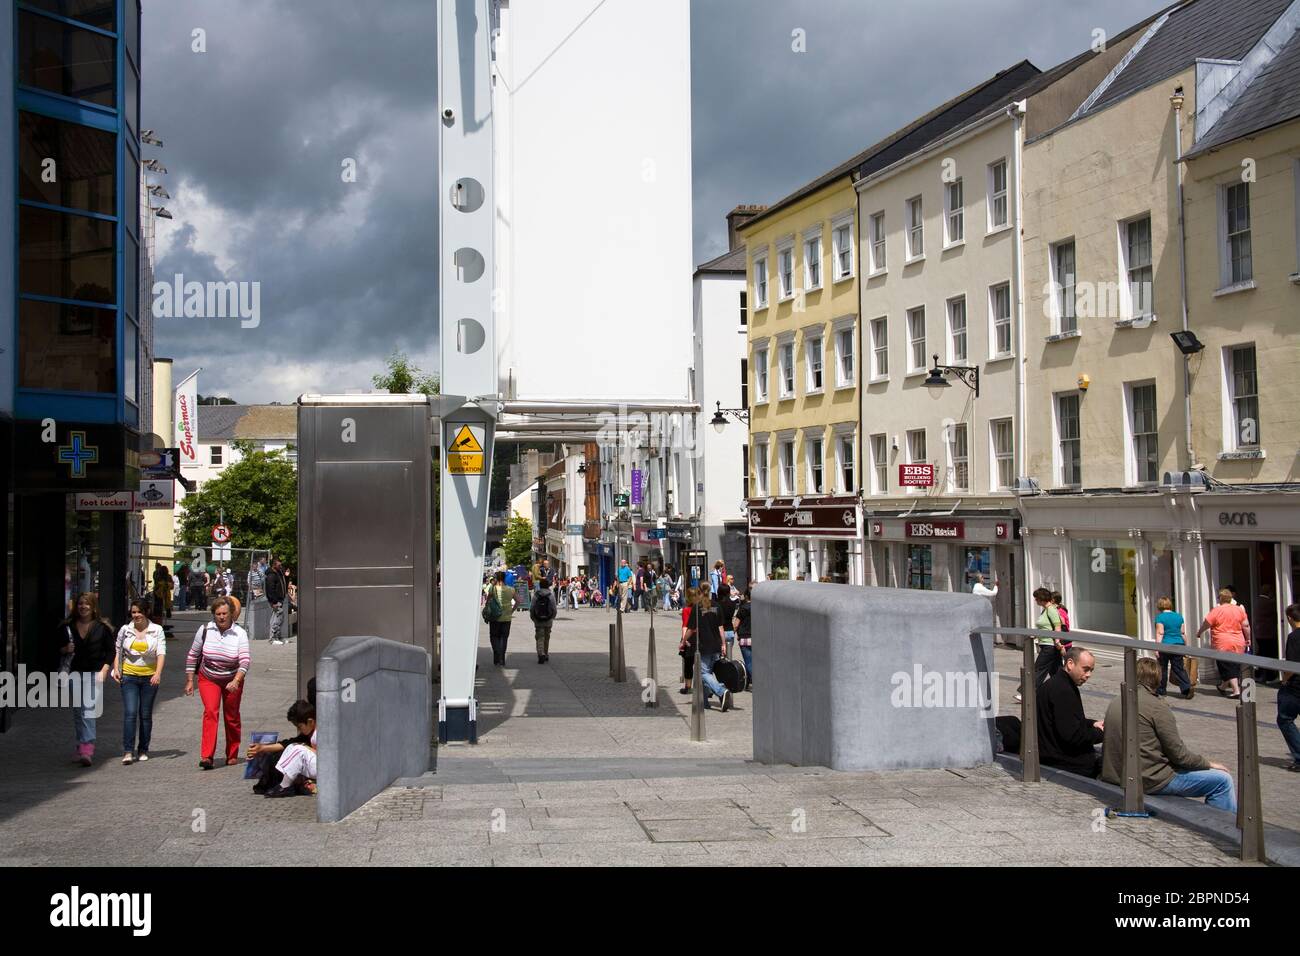 John Roberts Square, Waterford City, County Waterford, Irland Stockfoto